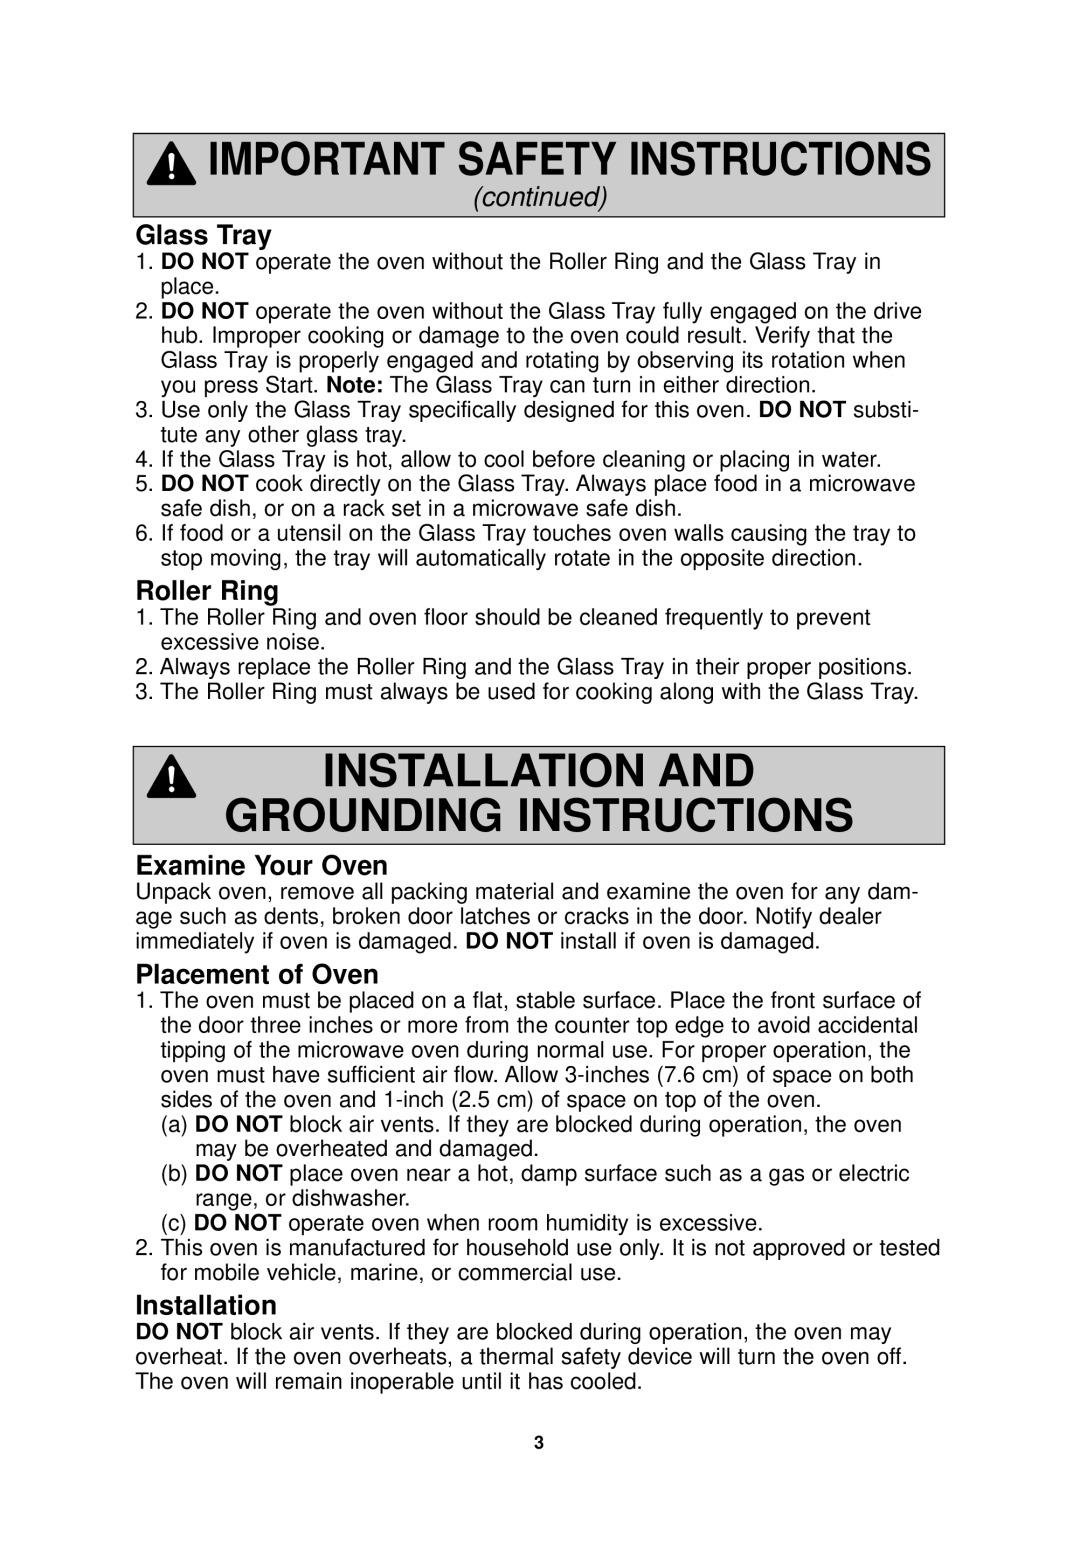 Panasonic NN-SD768W Installation And Grounding Instructions, Glass Tray, Roller Ring, Examine Your Oven, Placement of Oven 